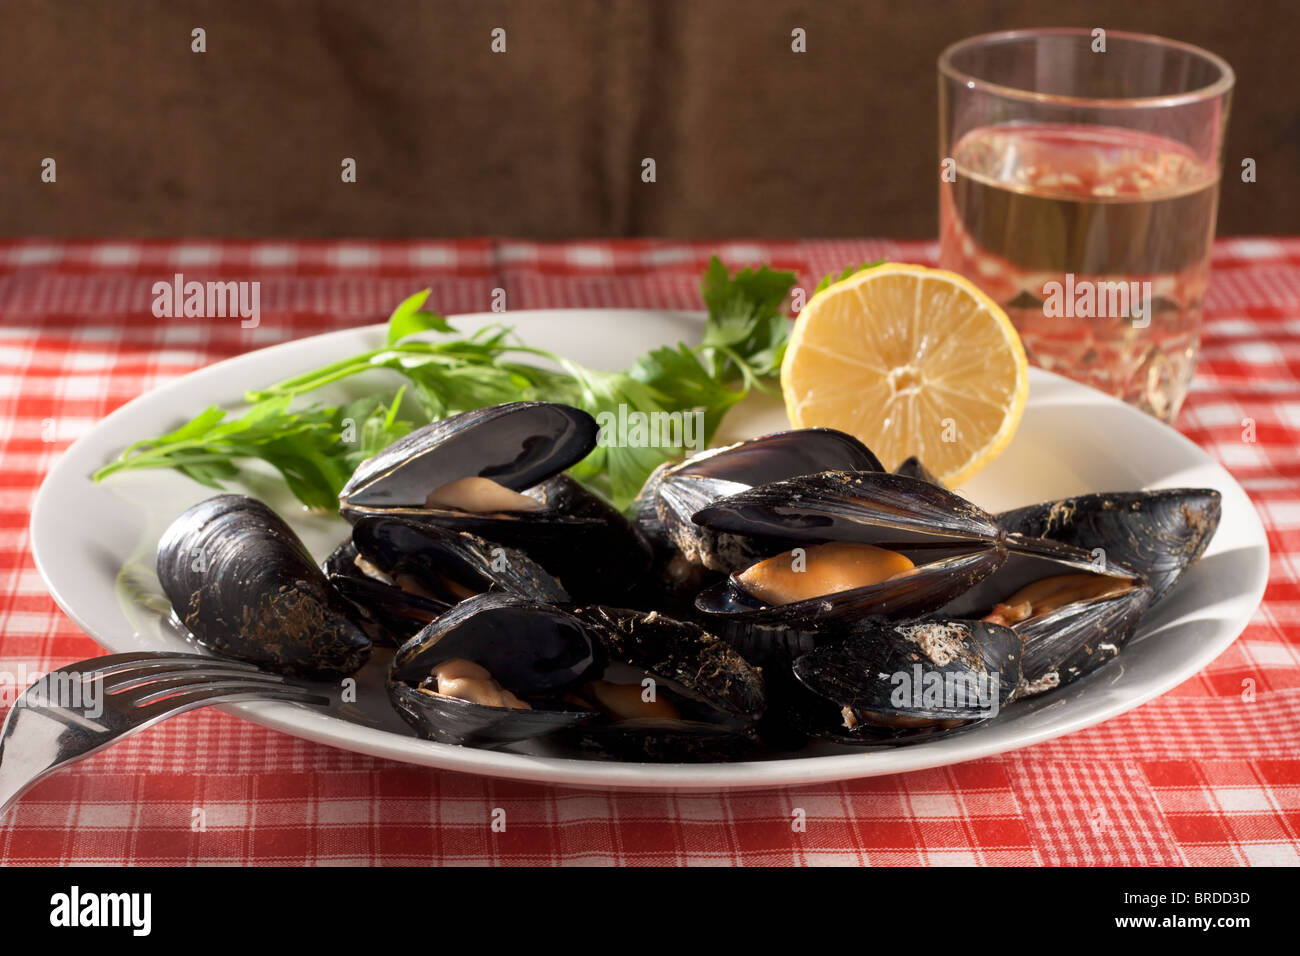 Mussels with Lemon, Parsley and Wine Stock Photo